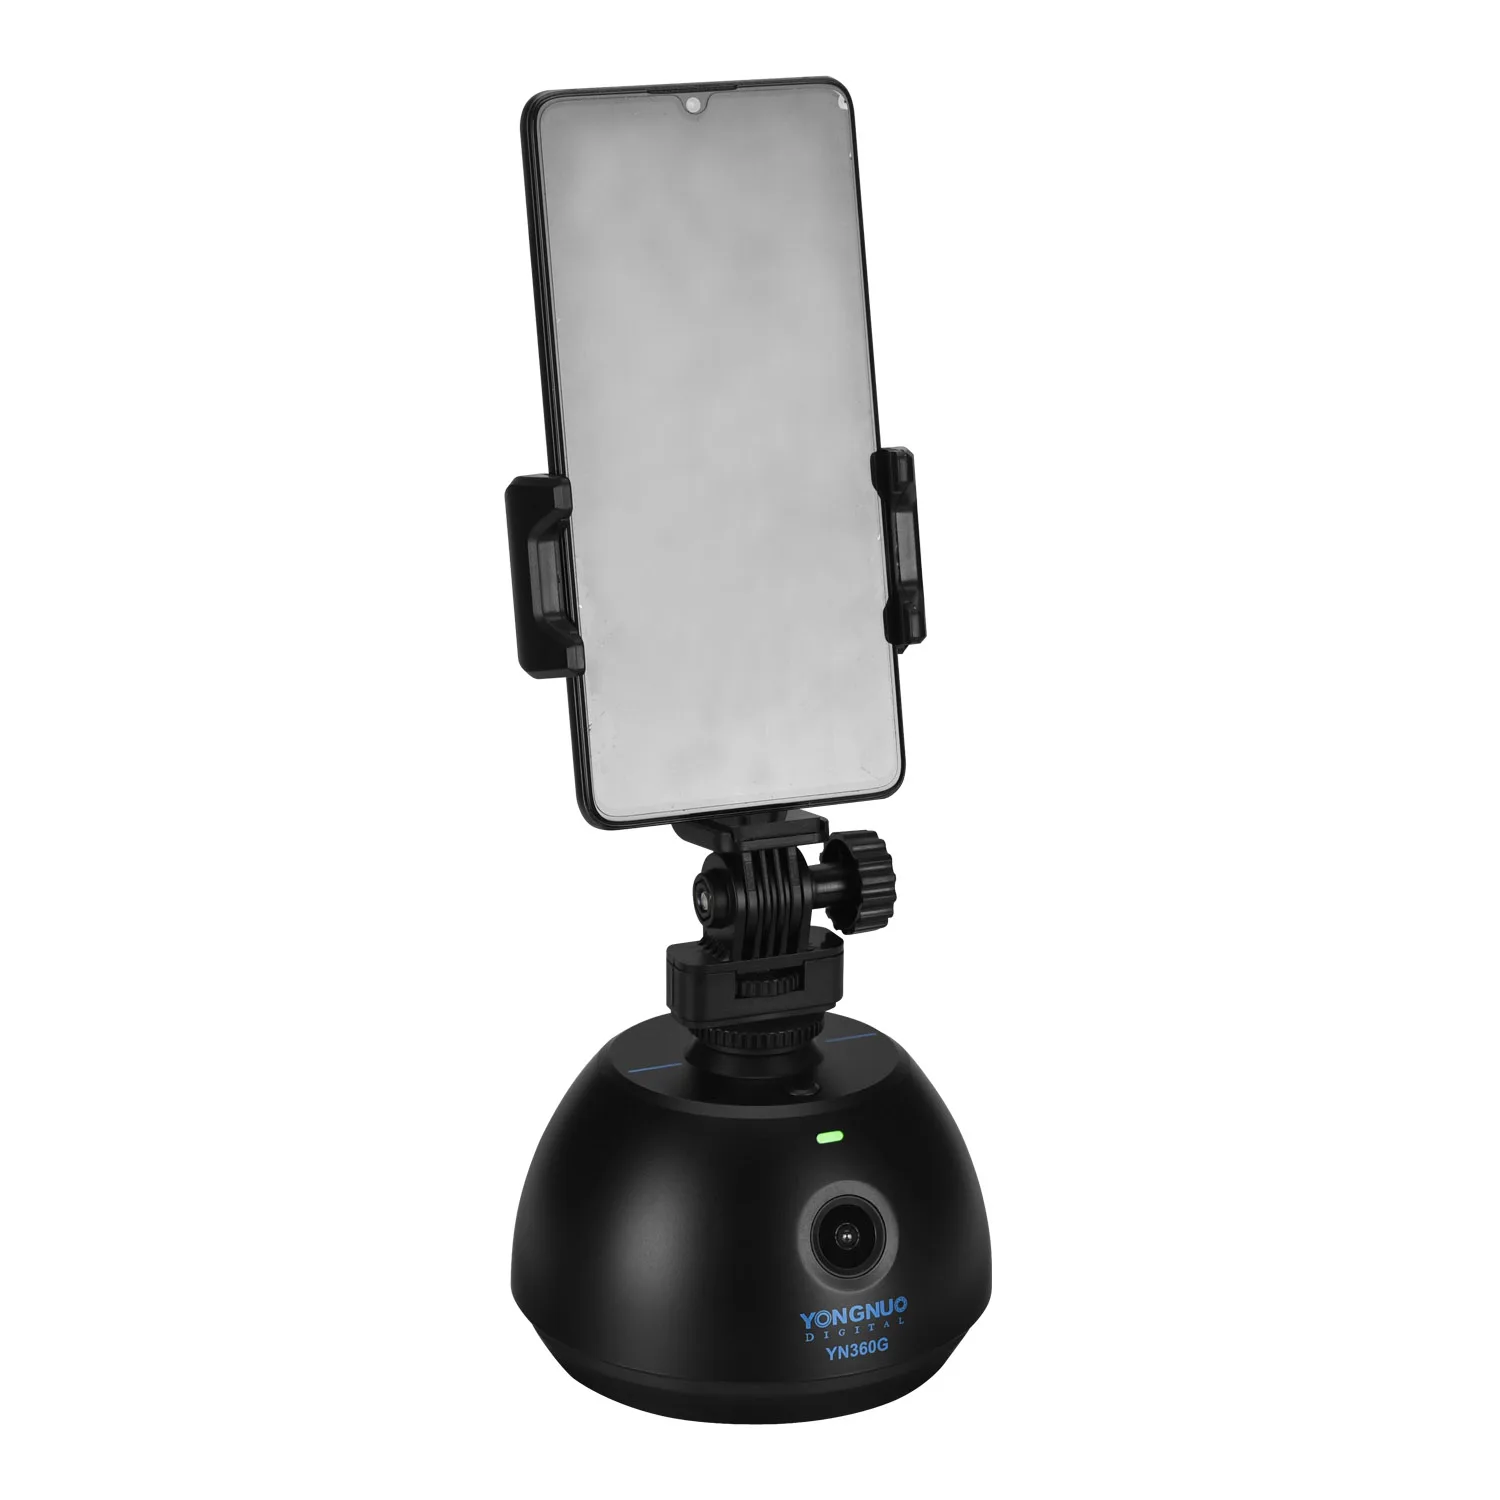 YONGNUO YN360G  Auto Tracking Smart Shooting Mobile Phone Holder Stand Auto 360 Rotation phone bracket Live Vlog Video  Recorder enlarge